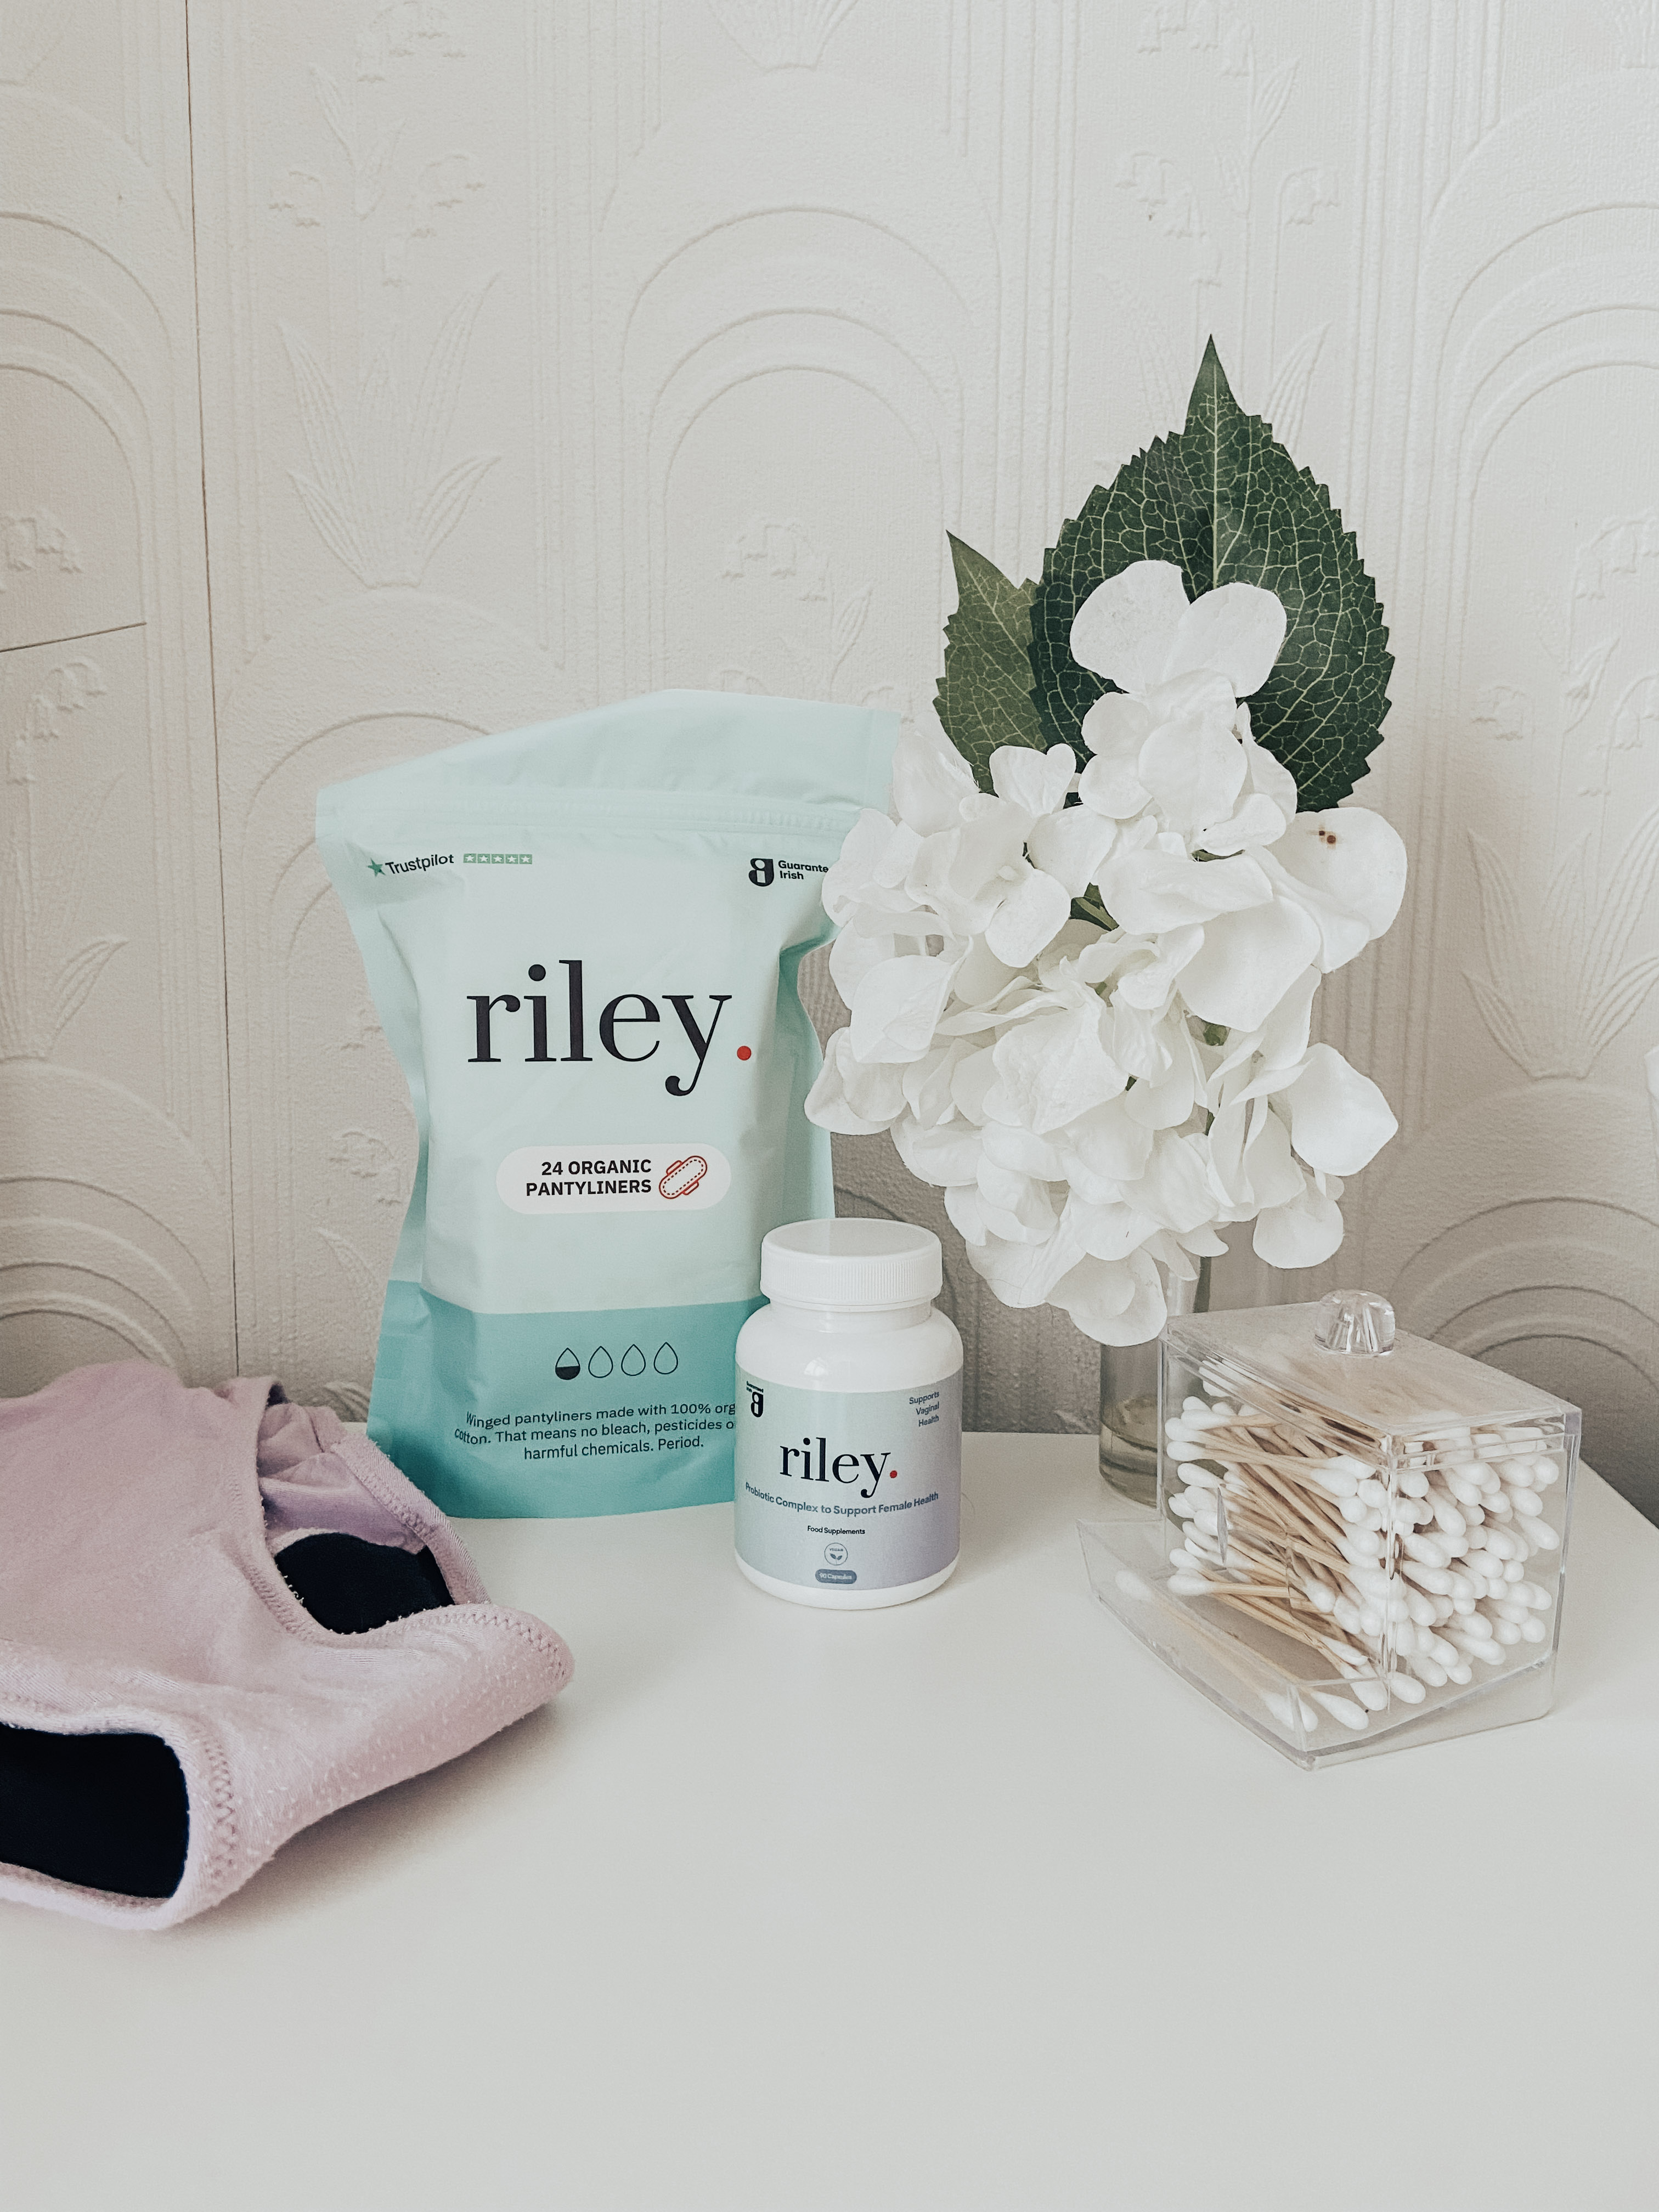 Riley pantyliners and probiotic supplments.